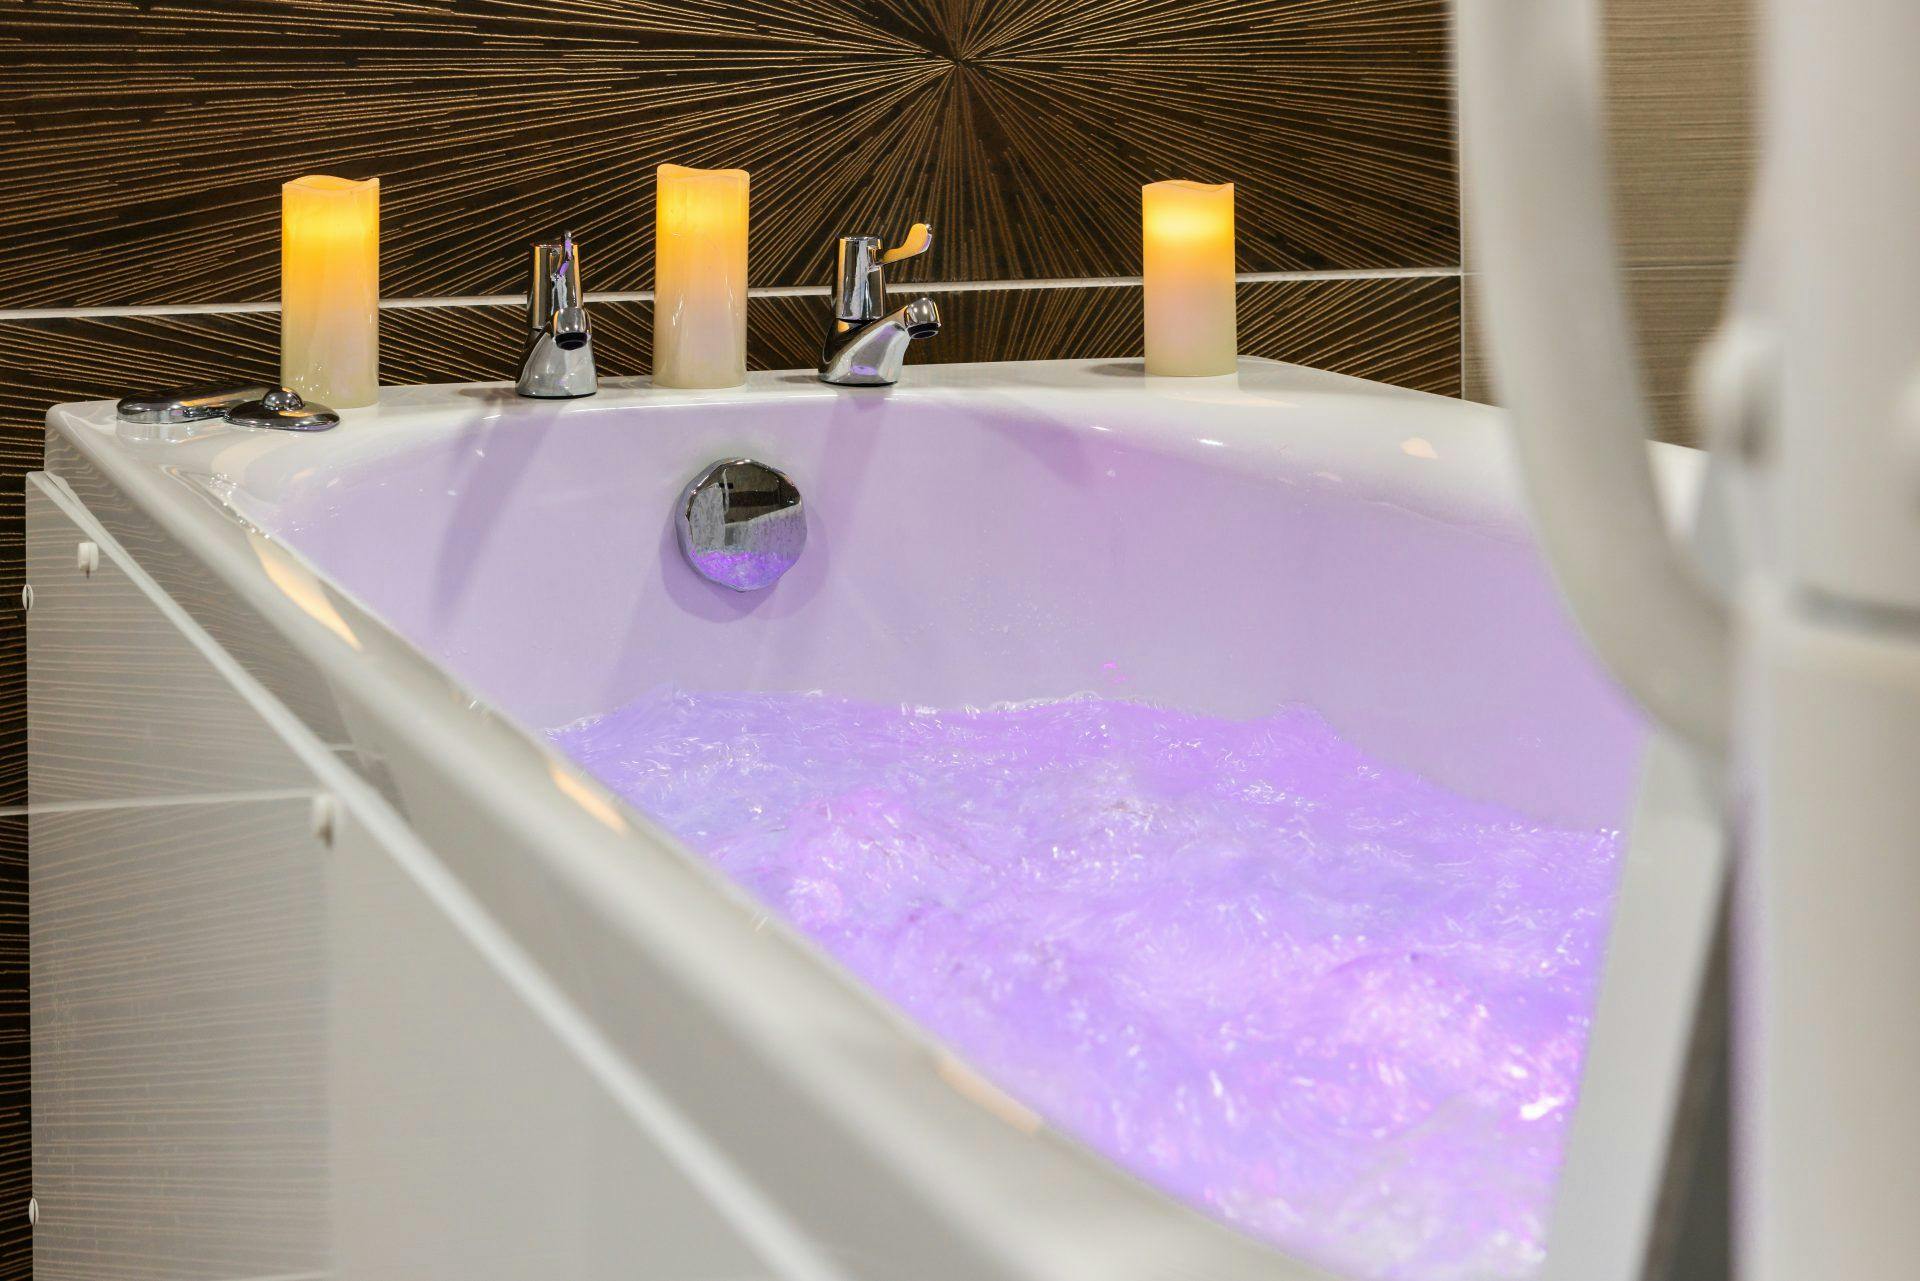 Bath of Lakeview Grange care home in Chichester, West Sussex